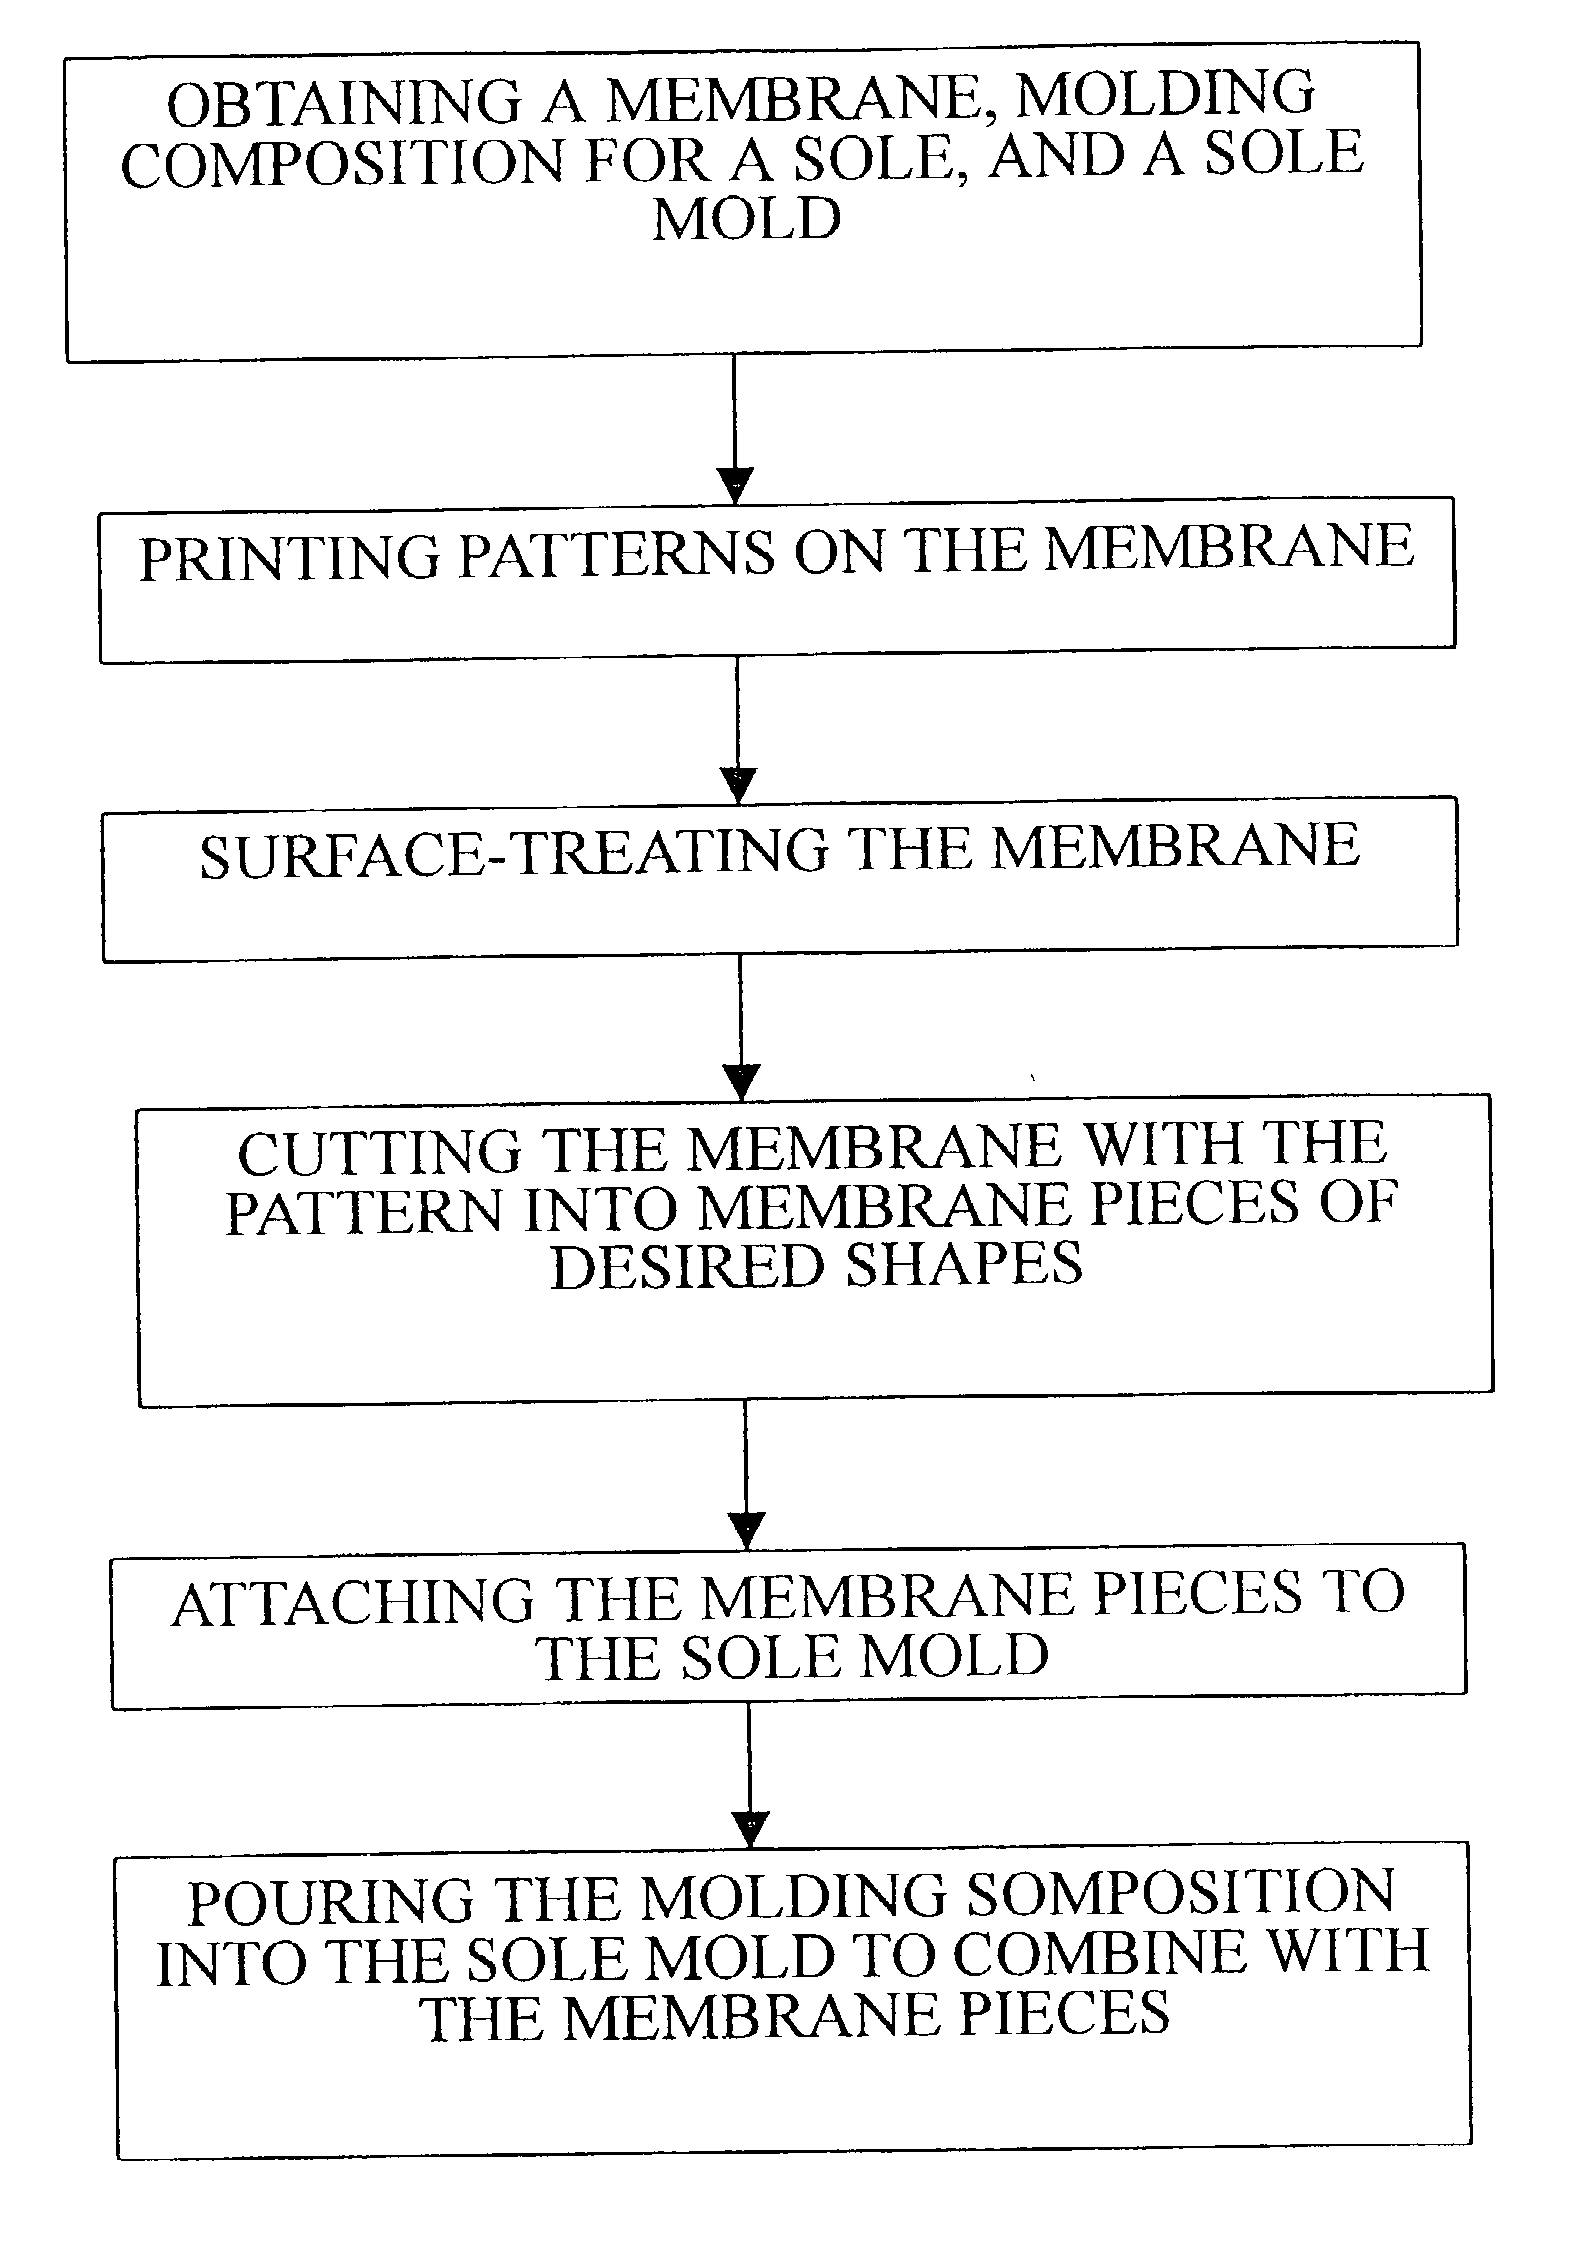 Method for producing a colorful sole